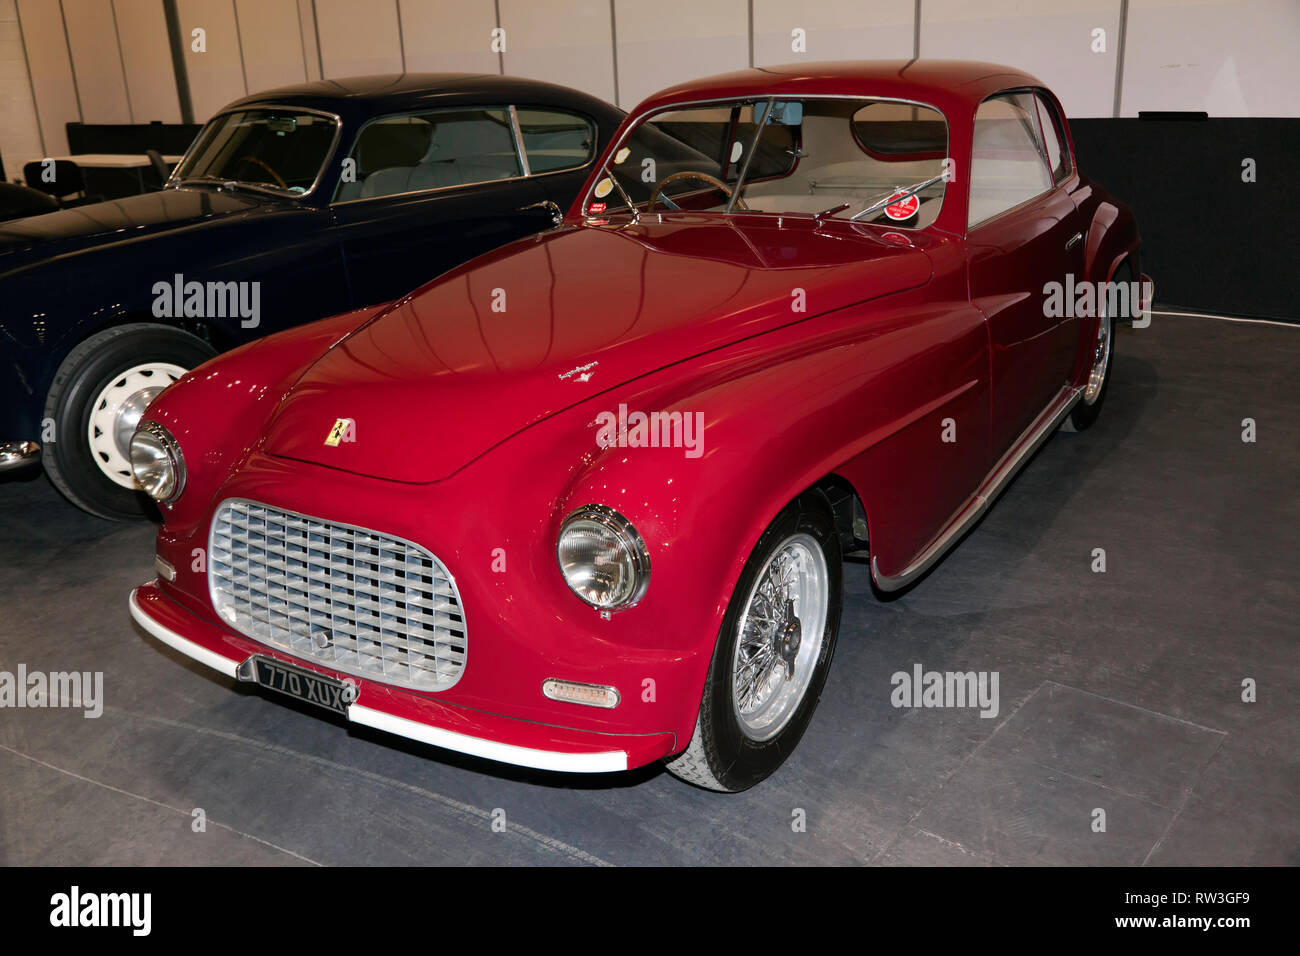 Three-quarter Front-View of a 1949, Ferrari 166 Inter Superleggera Coupe by Touring, on display at the 2019 London Classic Car Show Stock Photo